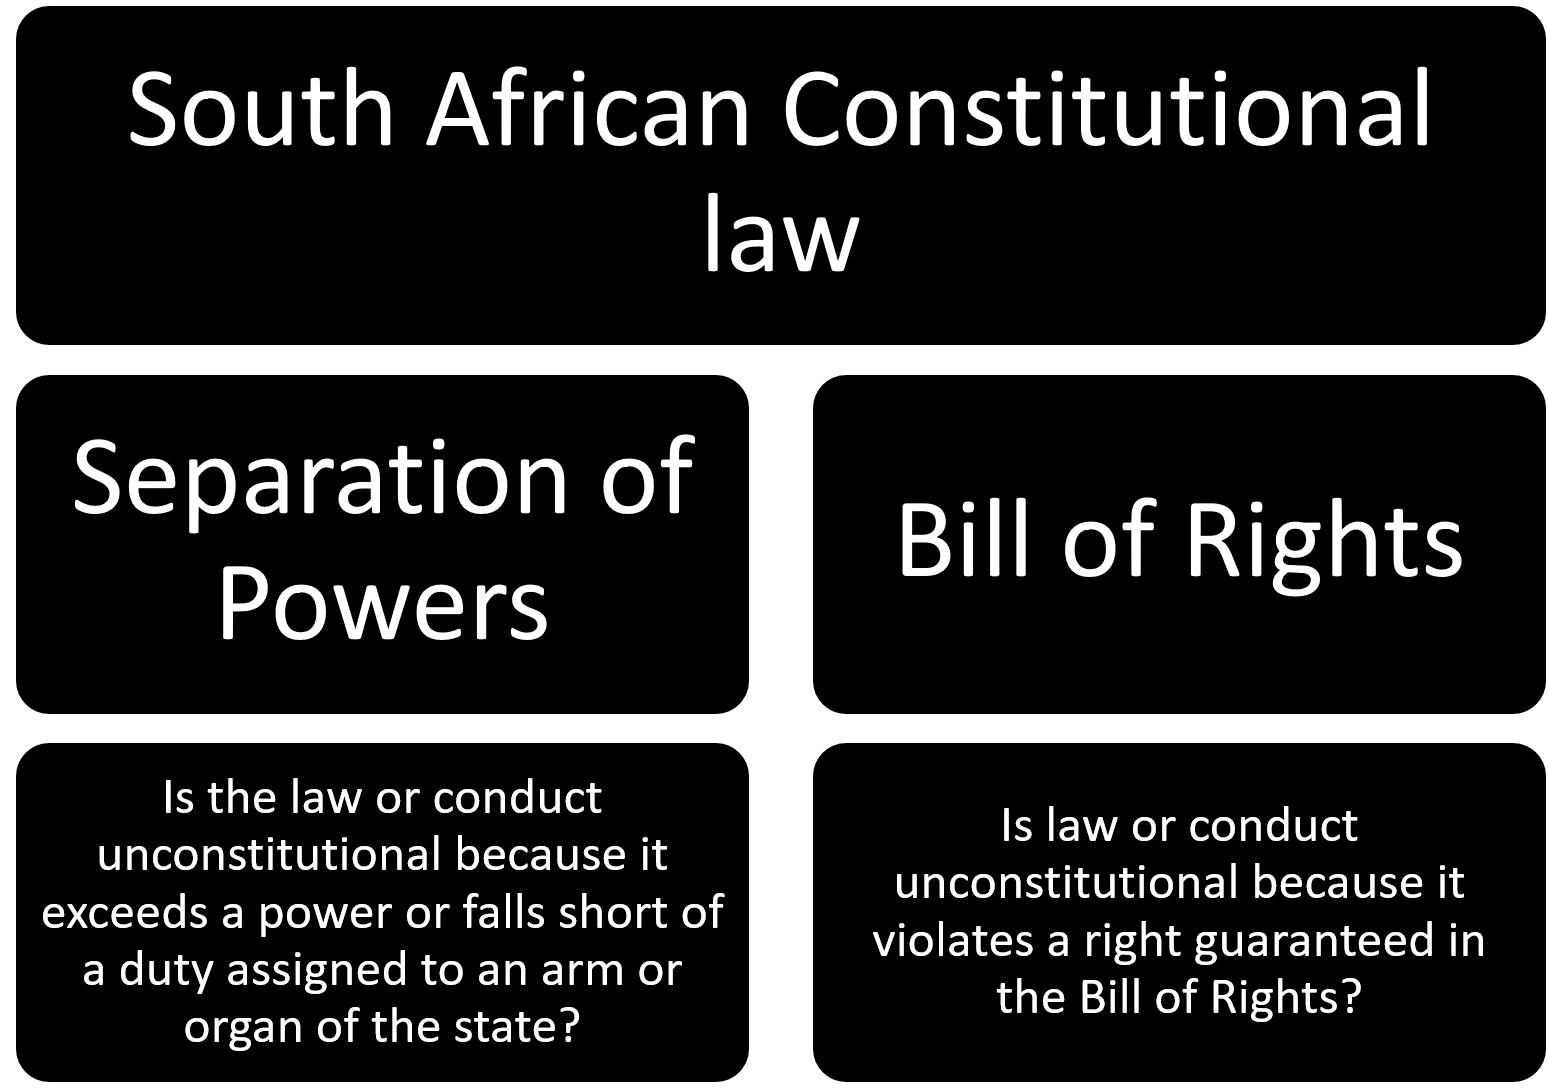 The following hierarchical diagram illustrates the bifocal conception of South African Constitutional law and the two instances in which law or conduct can be deemed to be unconstitutional in terms of South African constitutional law.The first instance provided being that the law or conduct is unconstitutional, in terms of the separation of powers doctrine, because it exceeds a power or falls short of a duty assigned to an arm or organ of state.The second instance provided being that the law or conduct is unconstitutional because it violates a right guaranteed in the Bill of Rights.